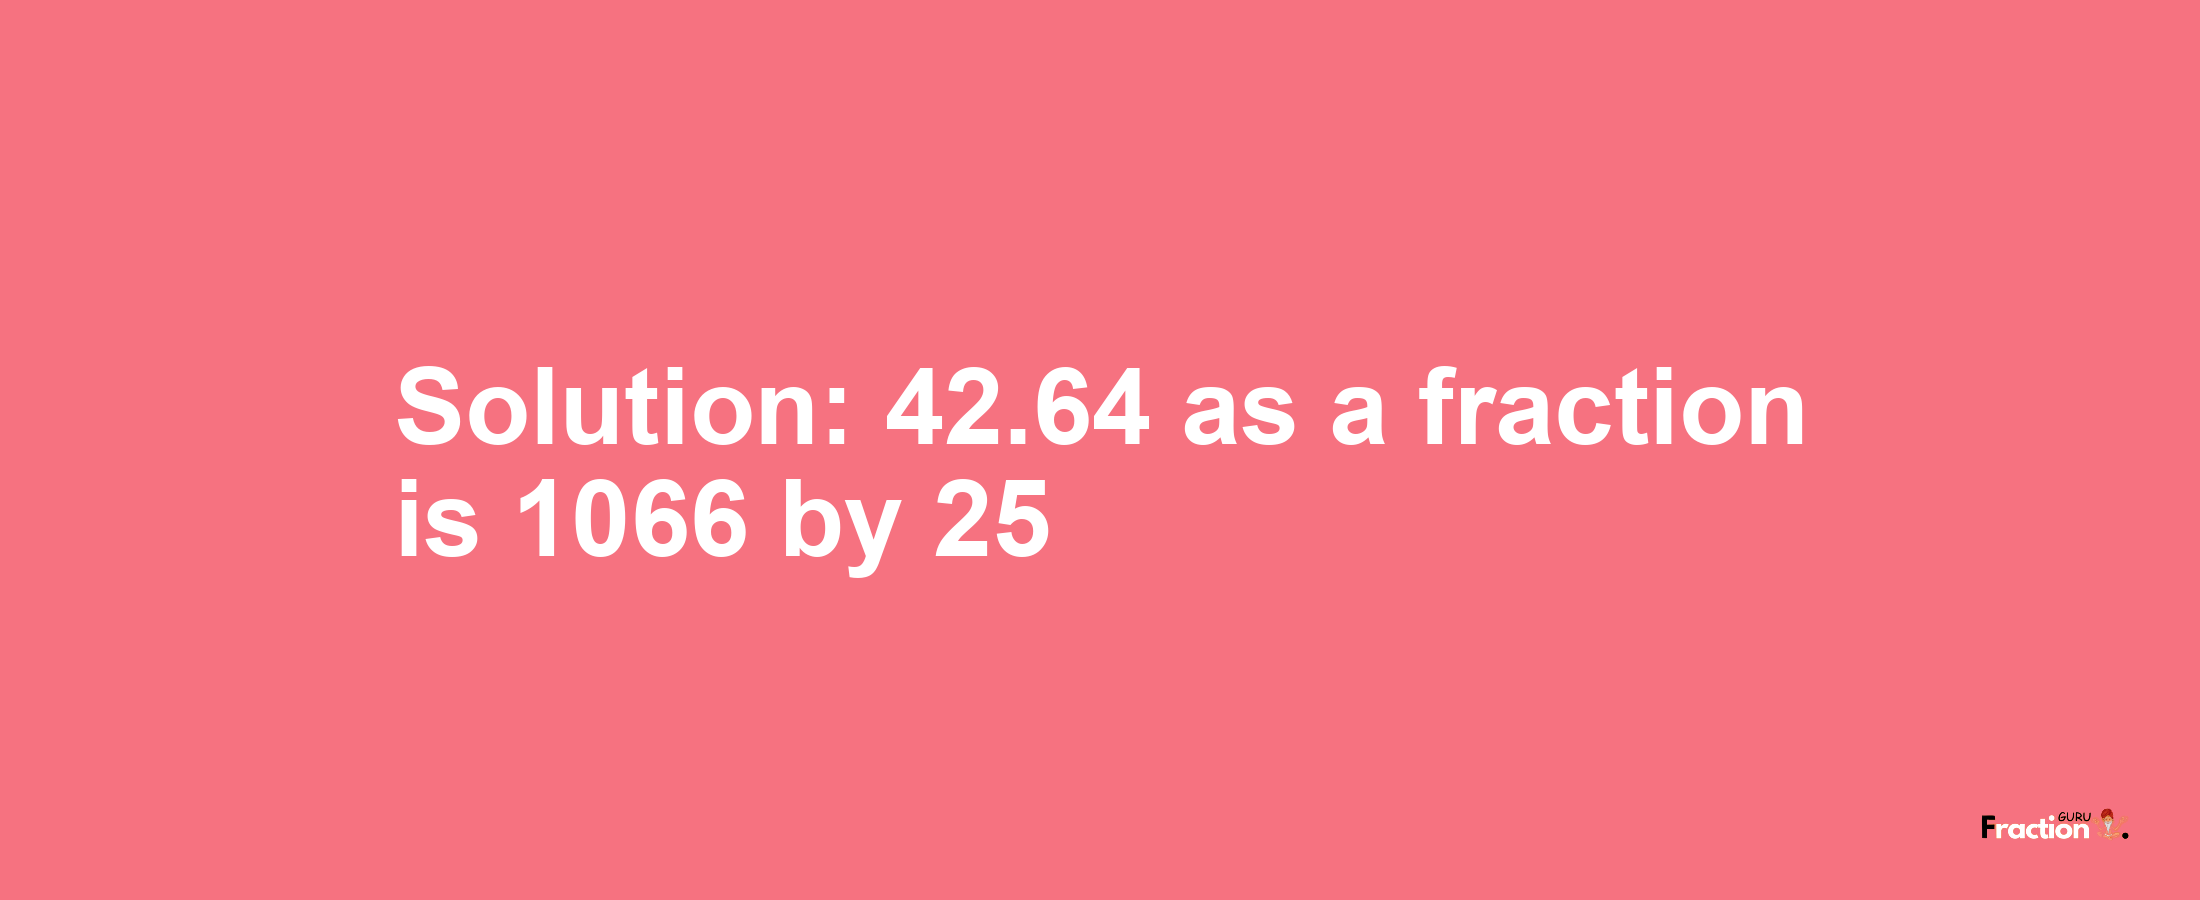 Solution:42.64 as a fraction is 1066/25